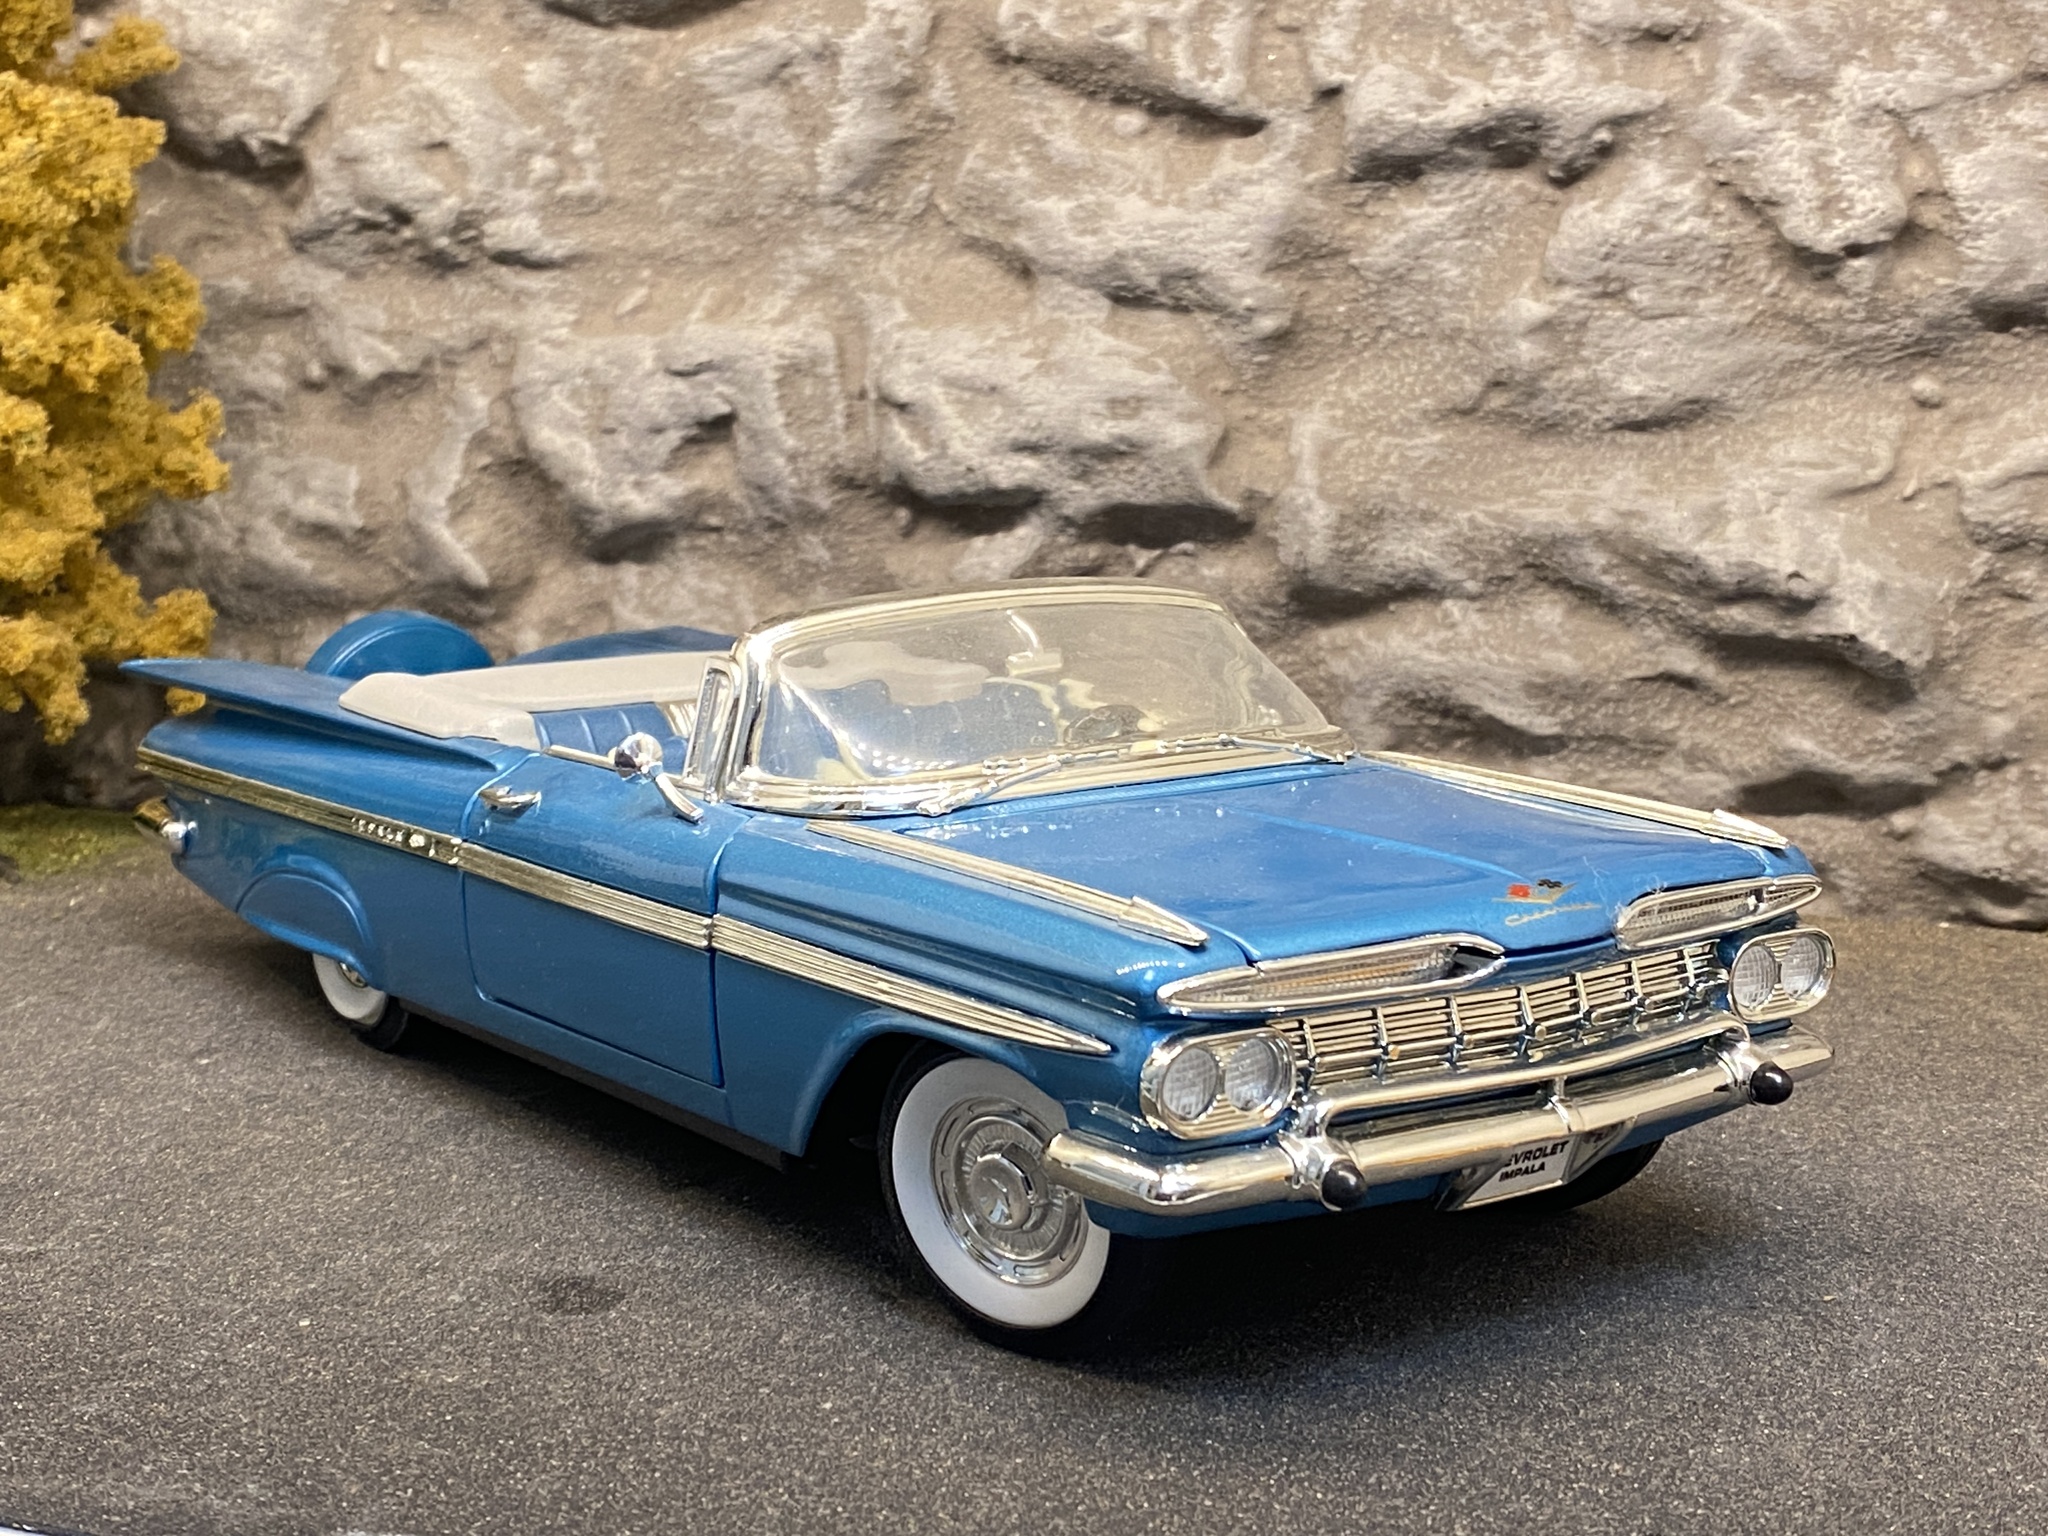 Skala 1/18 Chevrolet Impala 59' Blue fr Lucky Diecast "Road Signature Collection"